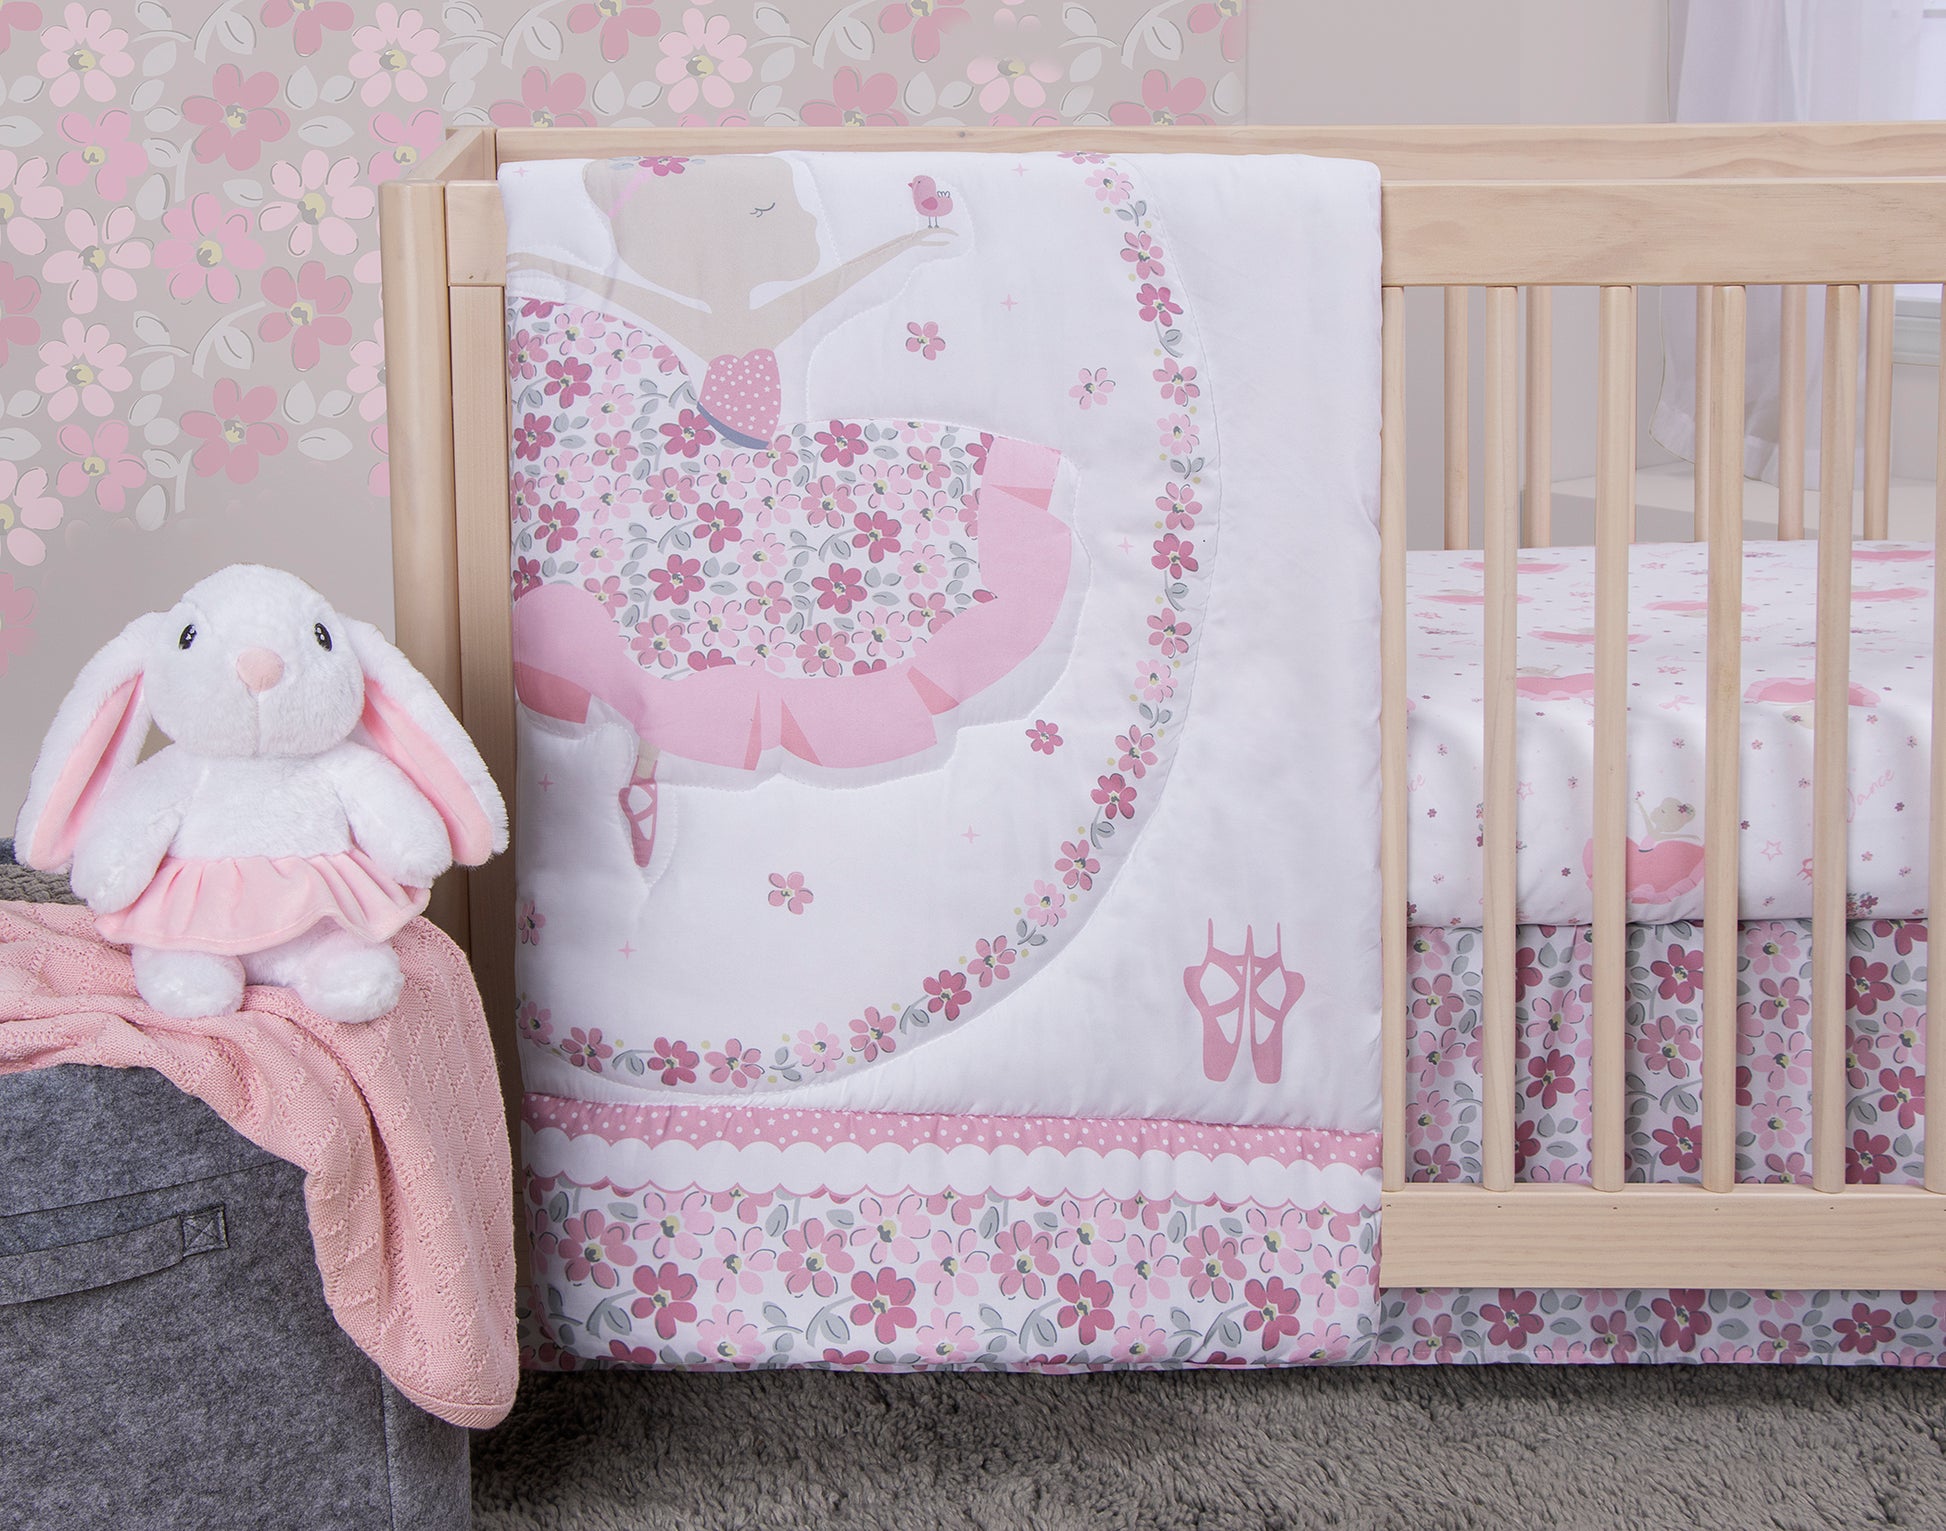  Blooming Ballet 4 Piece Crib Bedding Set- Stylized Room Image by Sammy and Lou